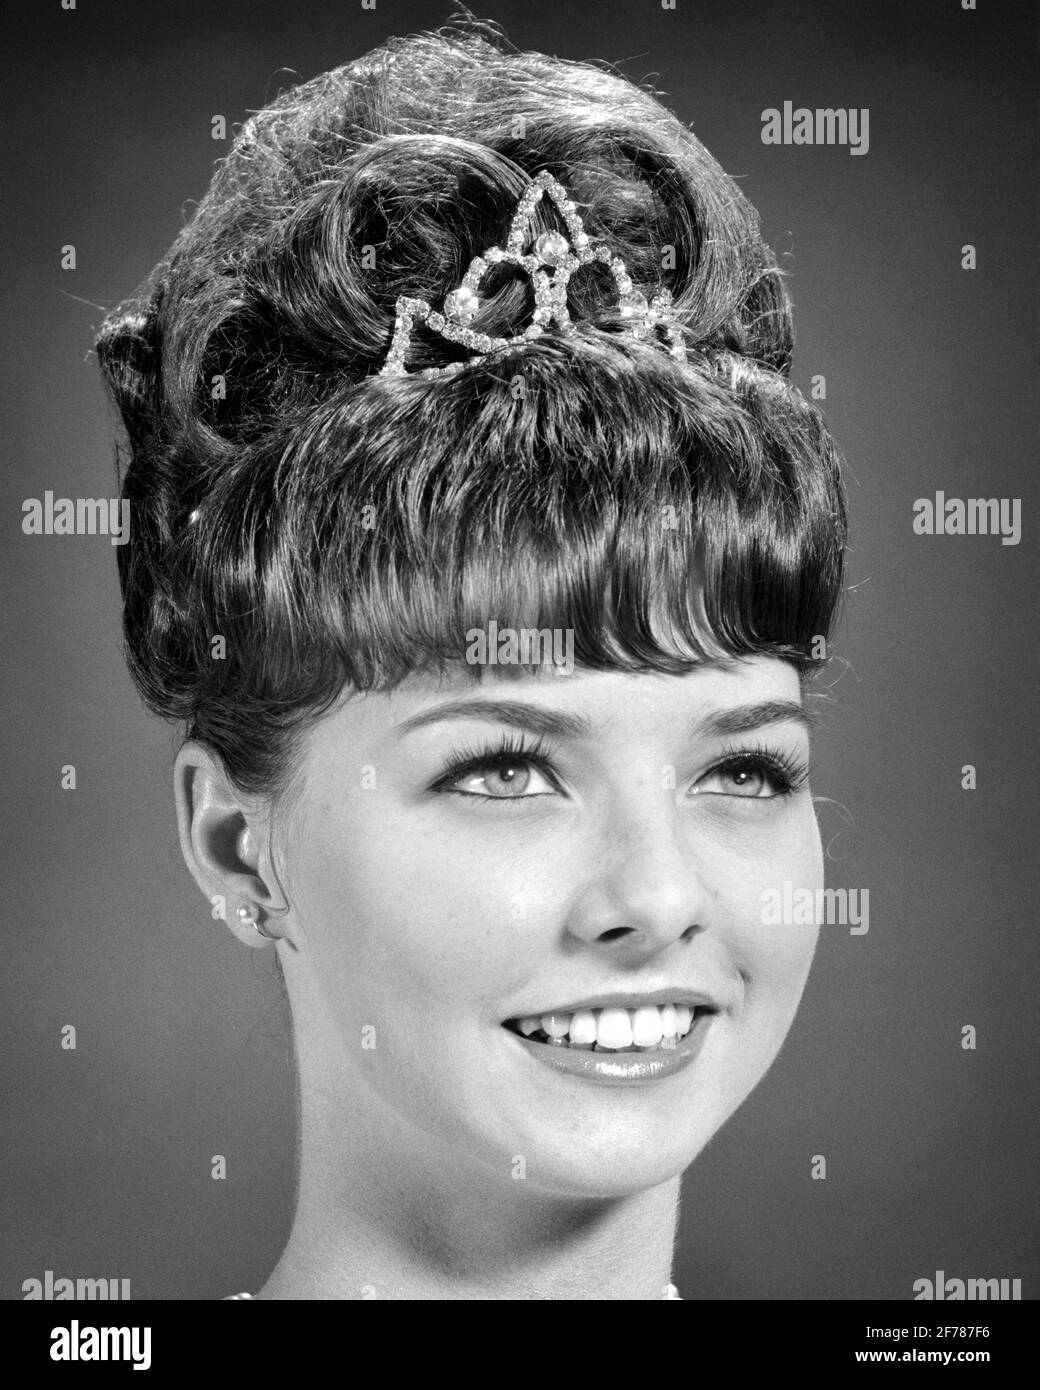 1960s SMILING YOUNG WOMAN WITH BRUNETTE BEEHIVE HAIRDO WEARING RHINESTONE TIARA  - f11745 HAR001 HARS HAIRSTYLE OCCASION TEASED HAIR PRIDE RHINESTONE BY STYLISH TEENAGED JEWELED HAIRDO WORN BANGS BIG HAIR BLACK AND WHITE BOUFFANT CAUCASIAN ETHNICITY DURING HAR001 OLD FASHIONED PRINCESS Stock Photo